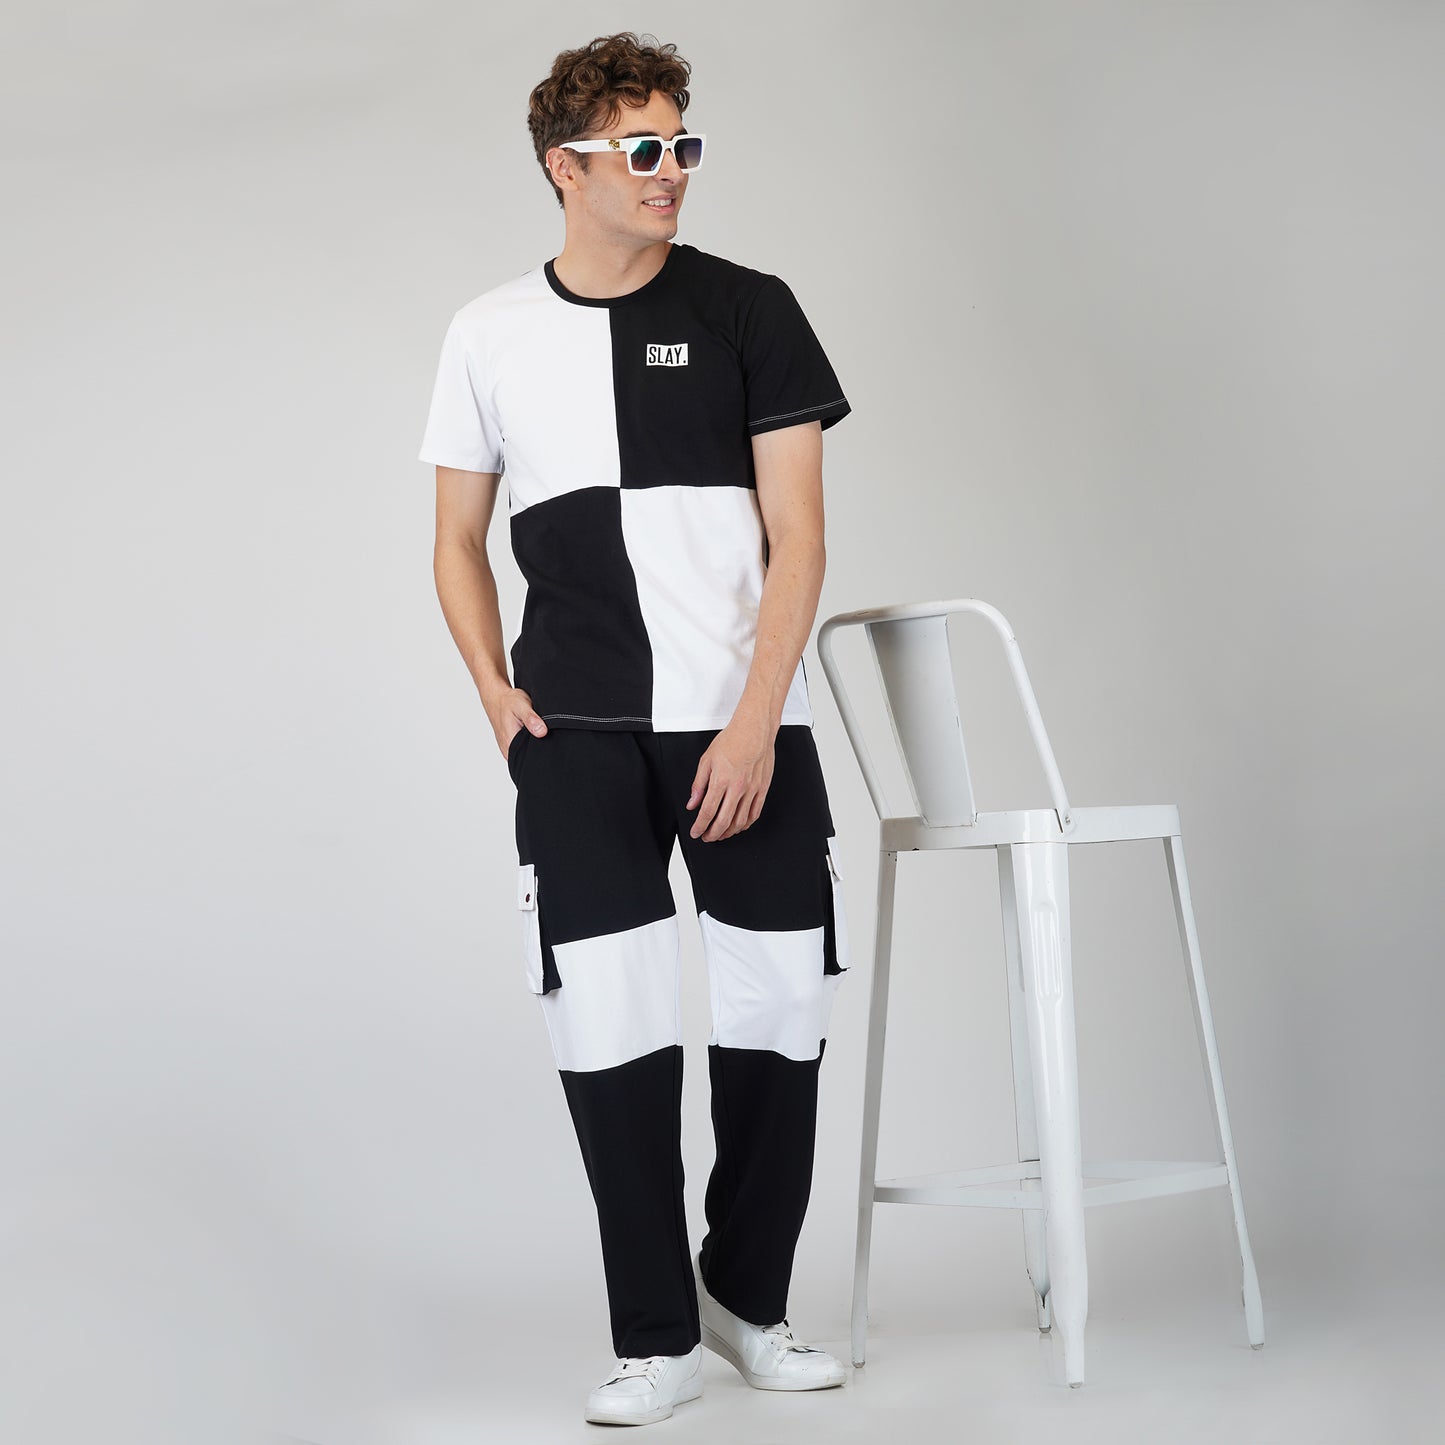 Regular Fit Black And White Cotton Plain Track Pants For Mens, Full Length,  Consumer Winning Quality, Unique Design, Bright Look, Soft Texture, Skin  Friendly, Comfortable To Wear, Well Stitched, Casual Wear at